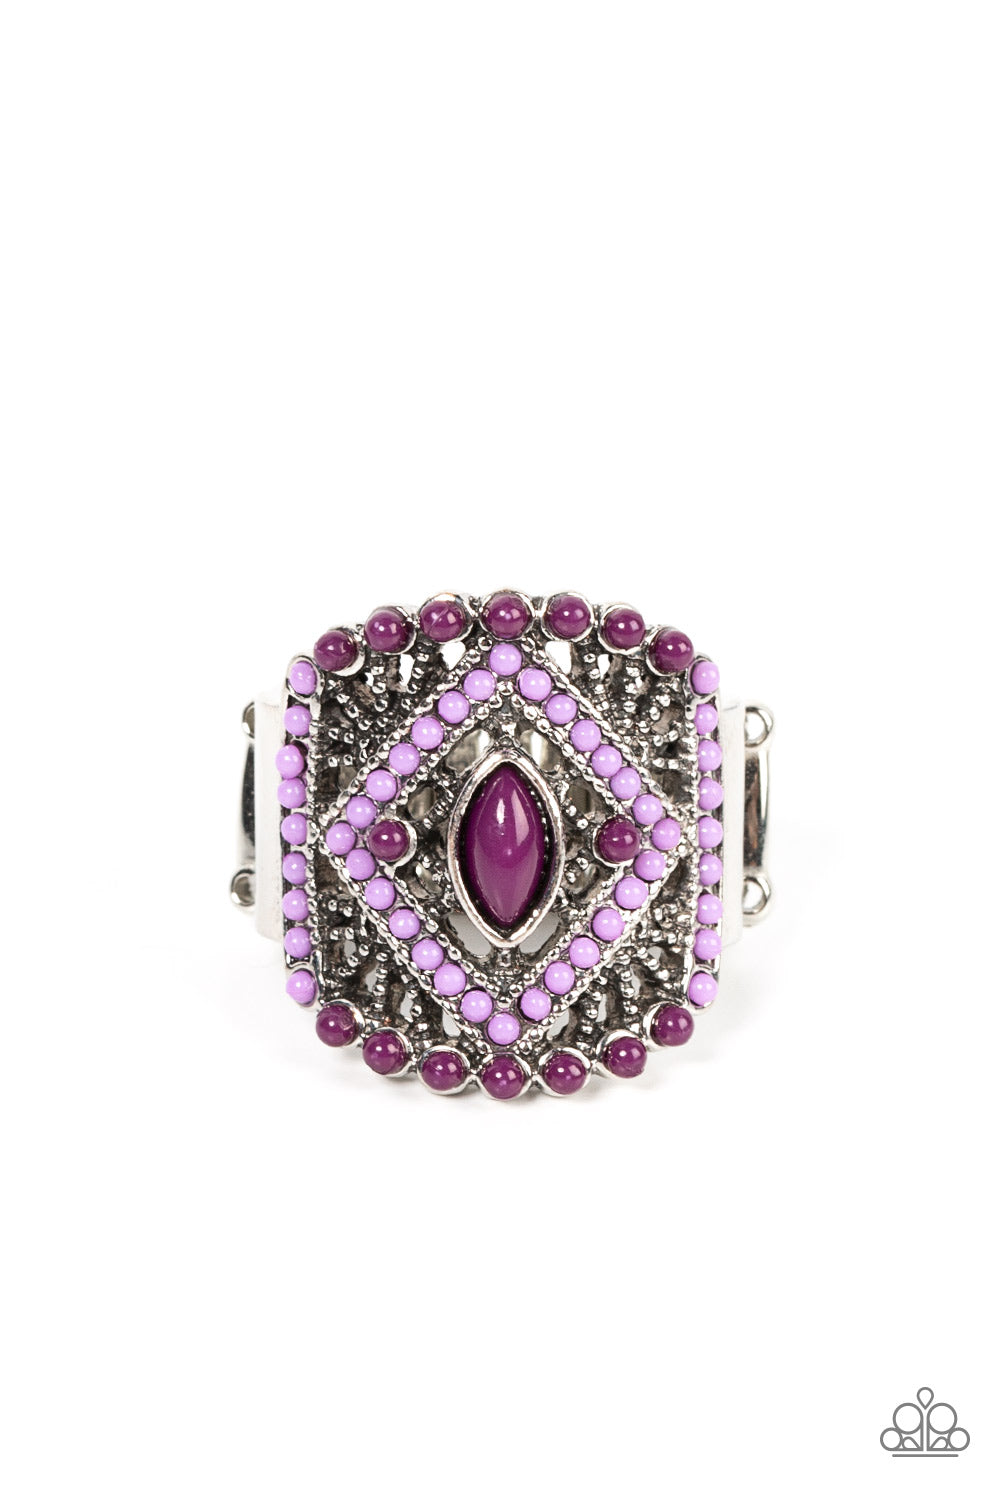 Paparazzi Accessories Amplified Aztec - Purple Dainty purple and plum beads adorn the front of an airy silver frame radiating with studded geometric texture, culminating into a colorful textile inspired pattern atop the finger. Features a stretchy band fo